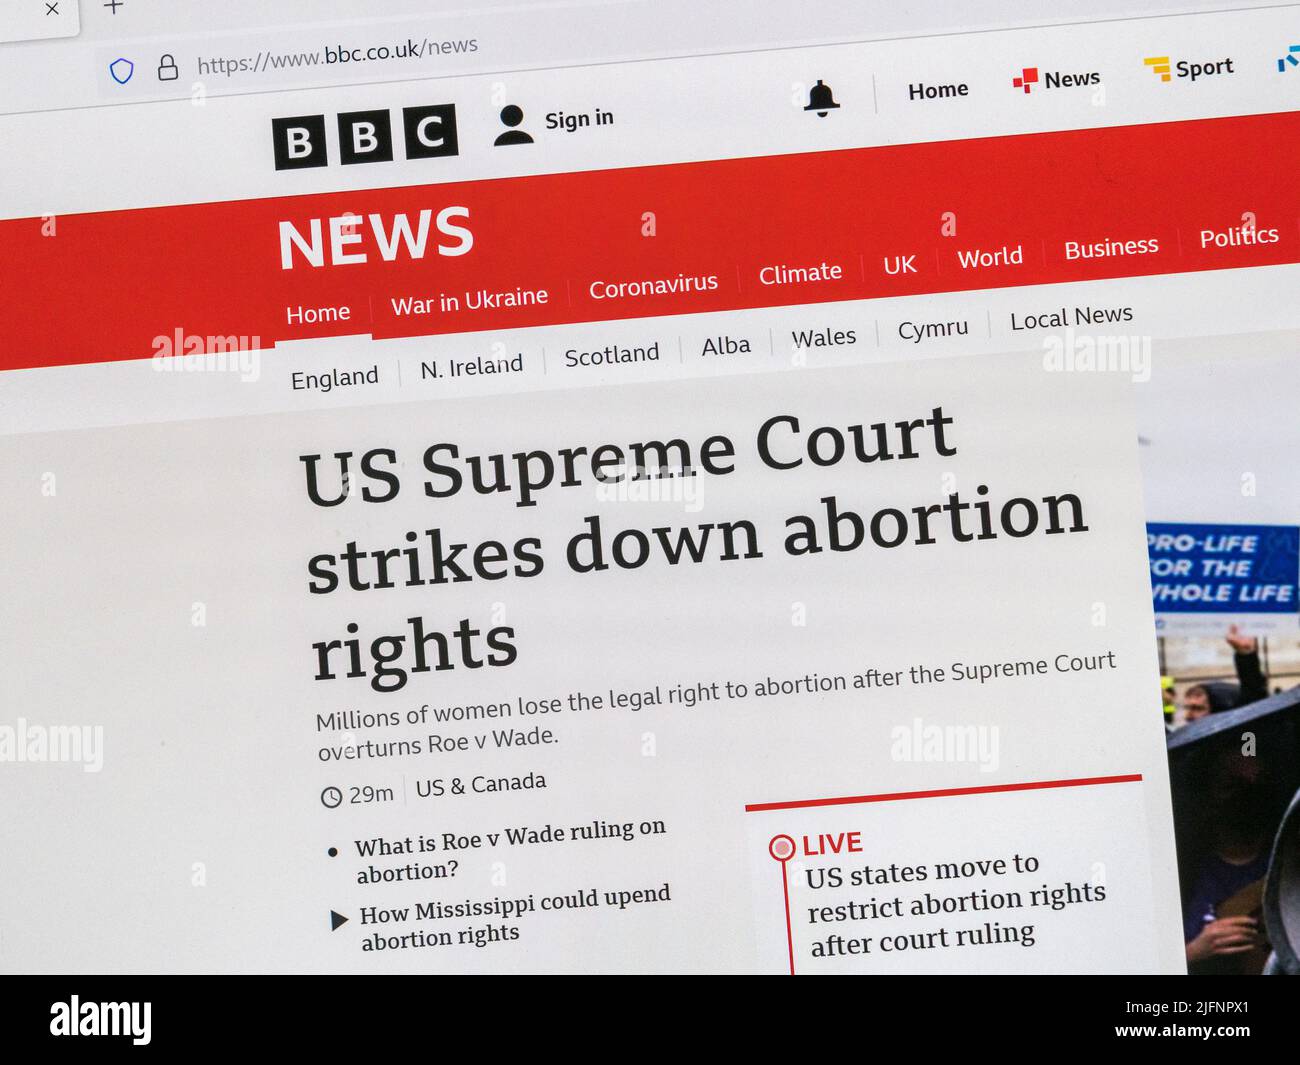 'US Supreme Court strikes down abortion rights'': BBC News website following the Supreme Court decision on 24th June 2022. Stock Photo